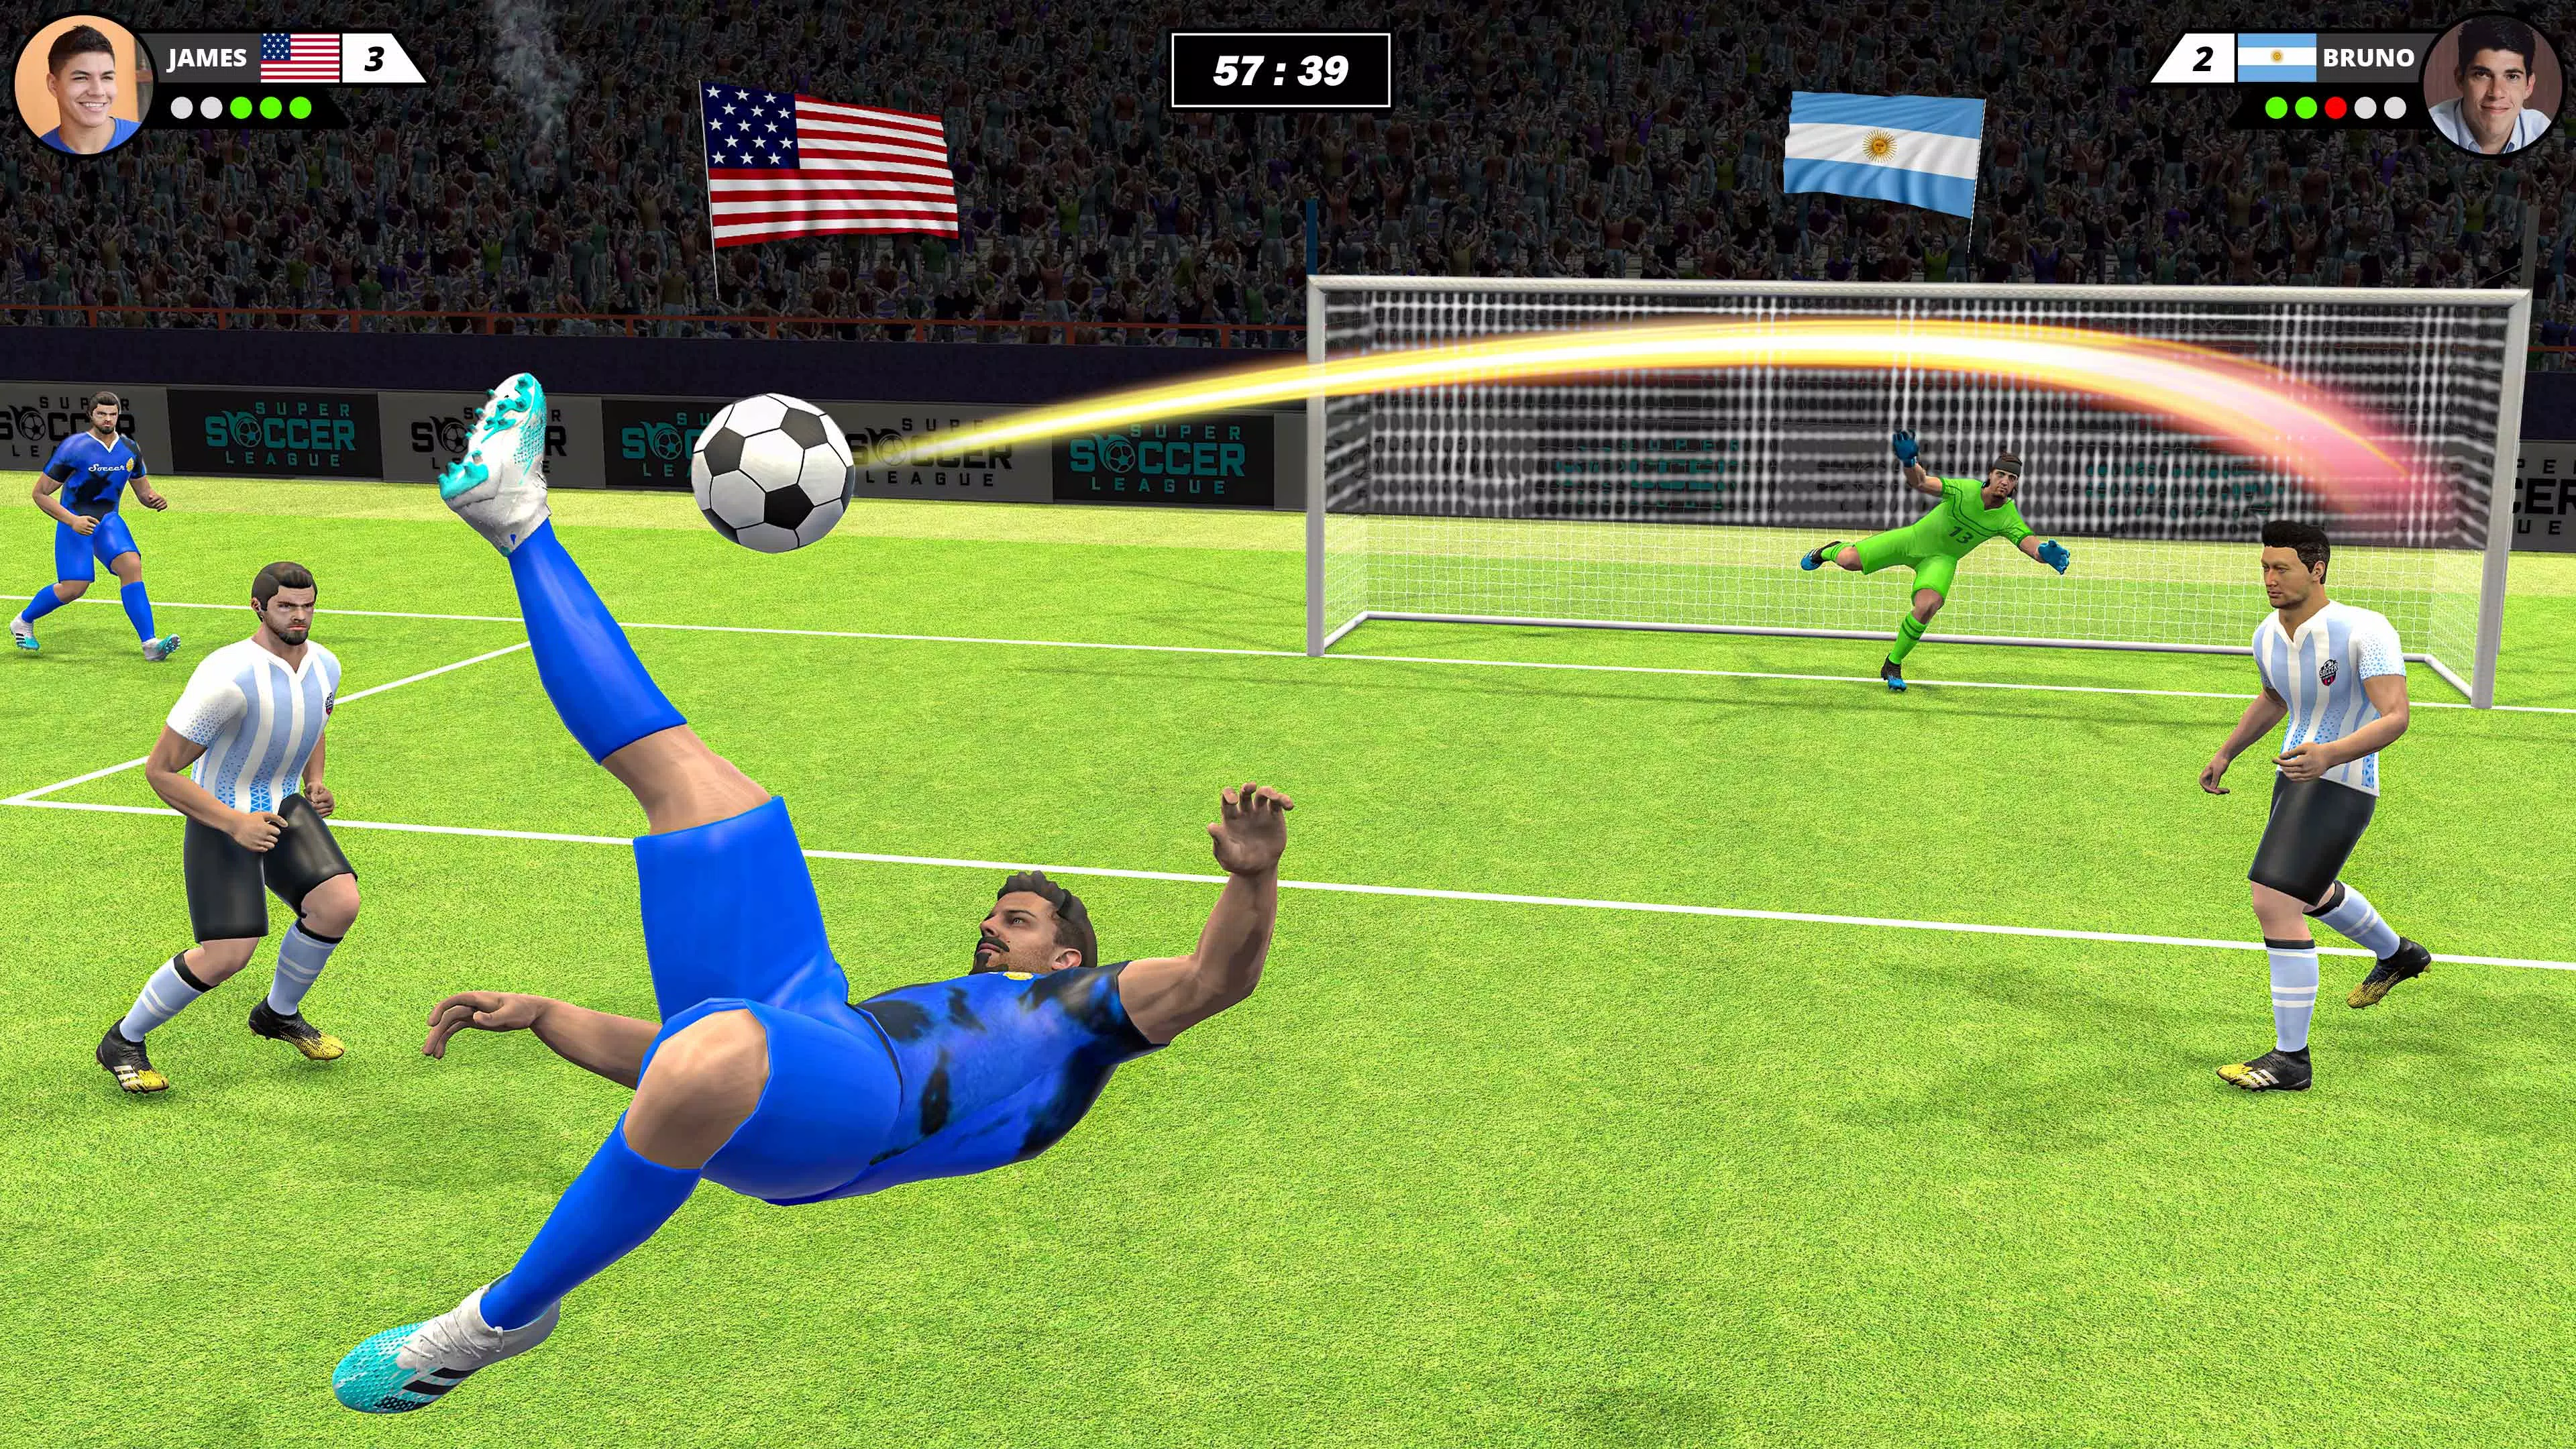 Football Games League 2023 para Android - Download